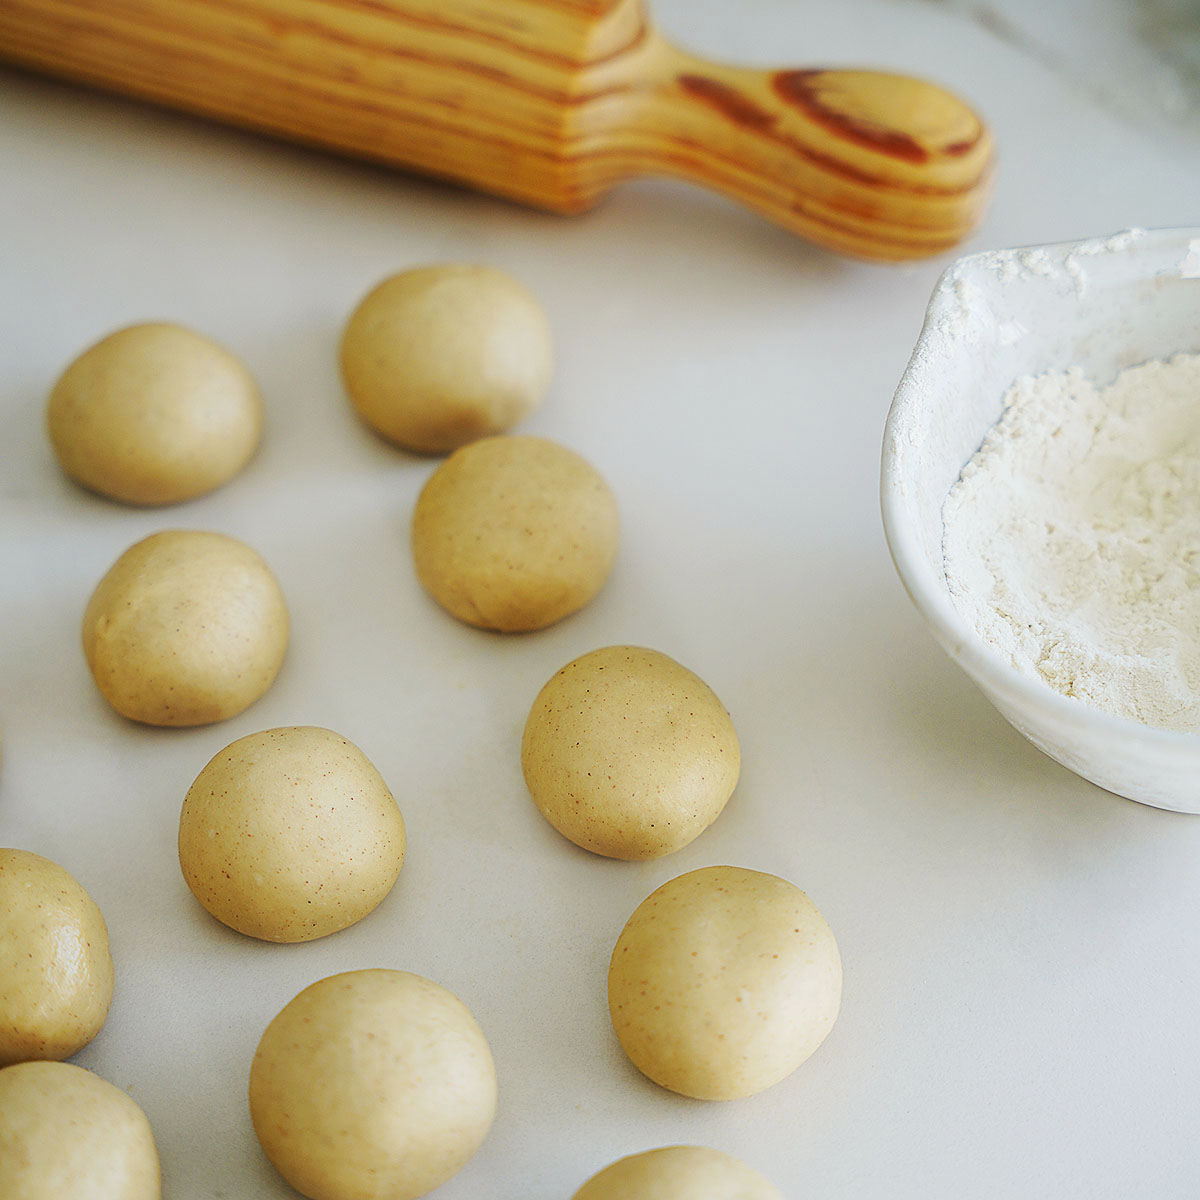 The dough in balls with flour on the side.